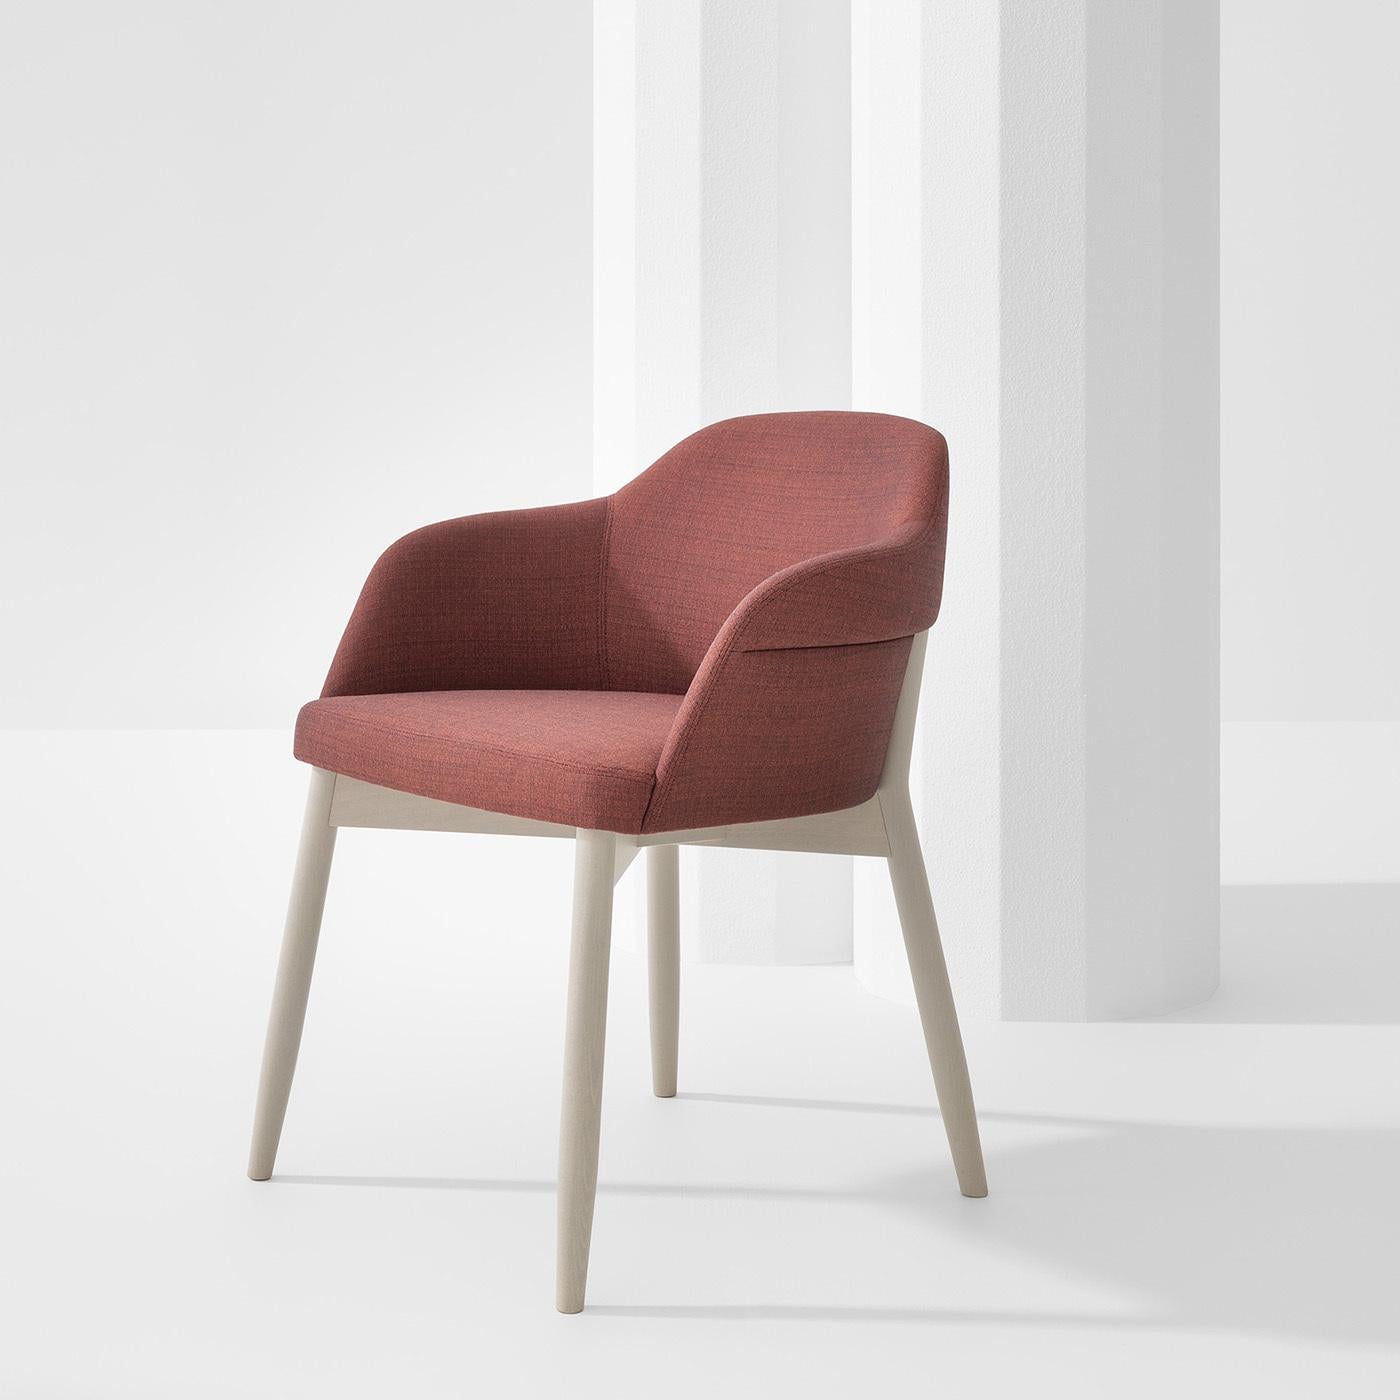 This outstanding lounge chair by Emilio Nanni plays with colors and smooth lines, resulting in a perfect balance of rare sophistication. Crafted of solid beech tinted in silk gray, the silhouette includes four fluted legs supporting the wide seat